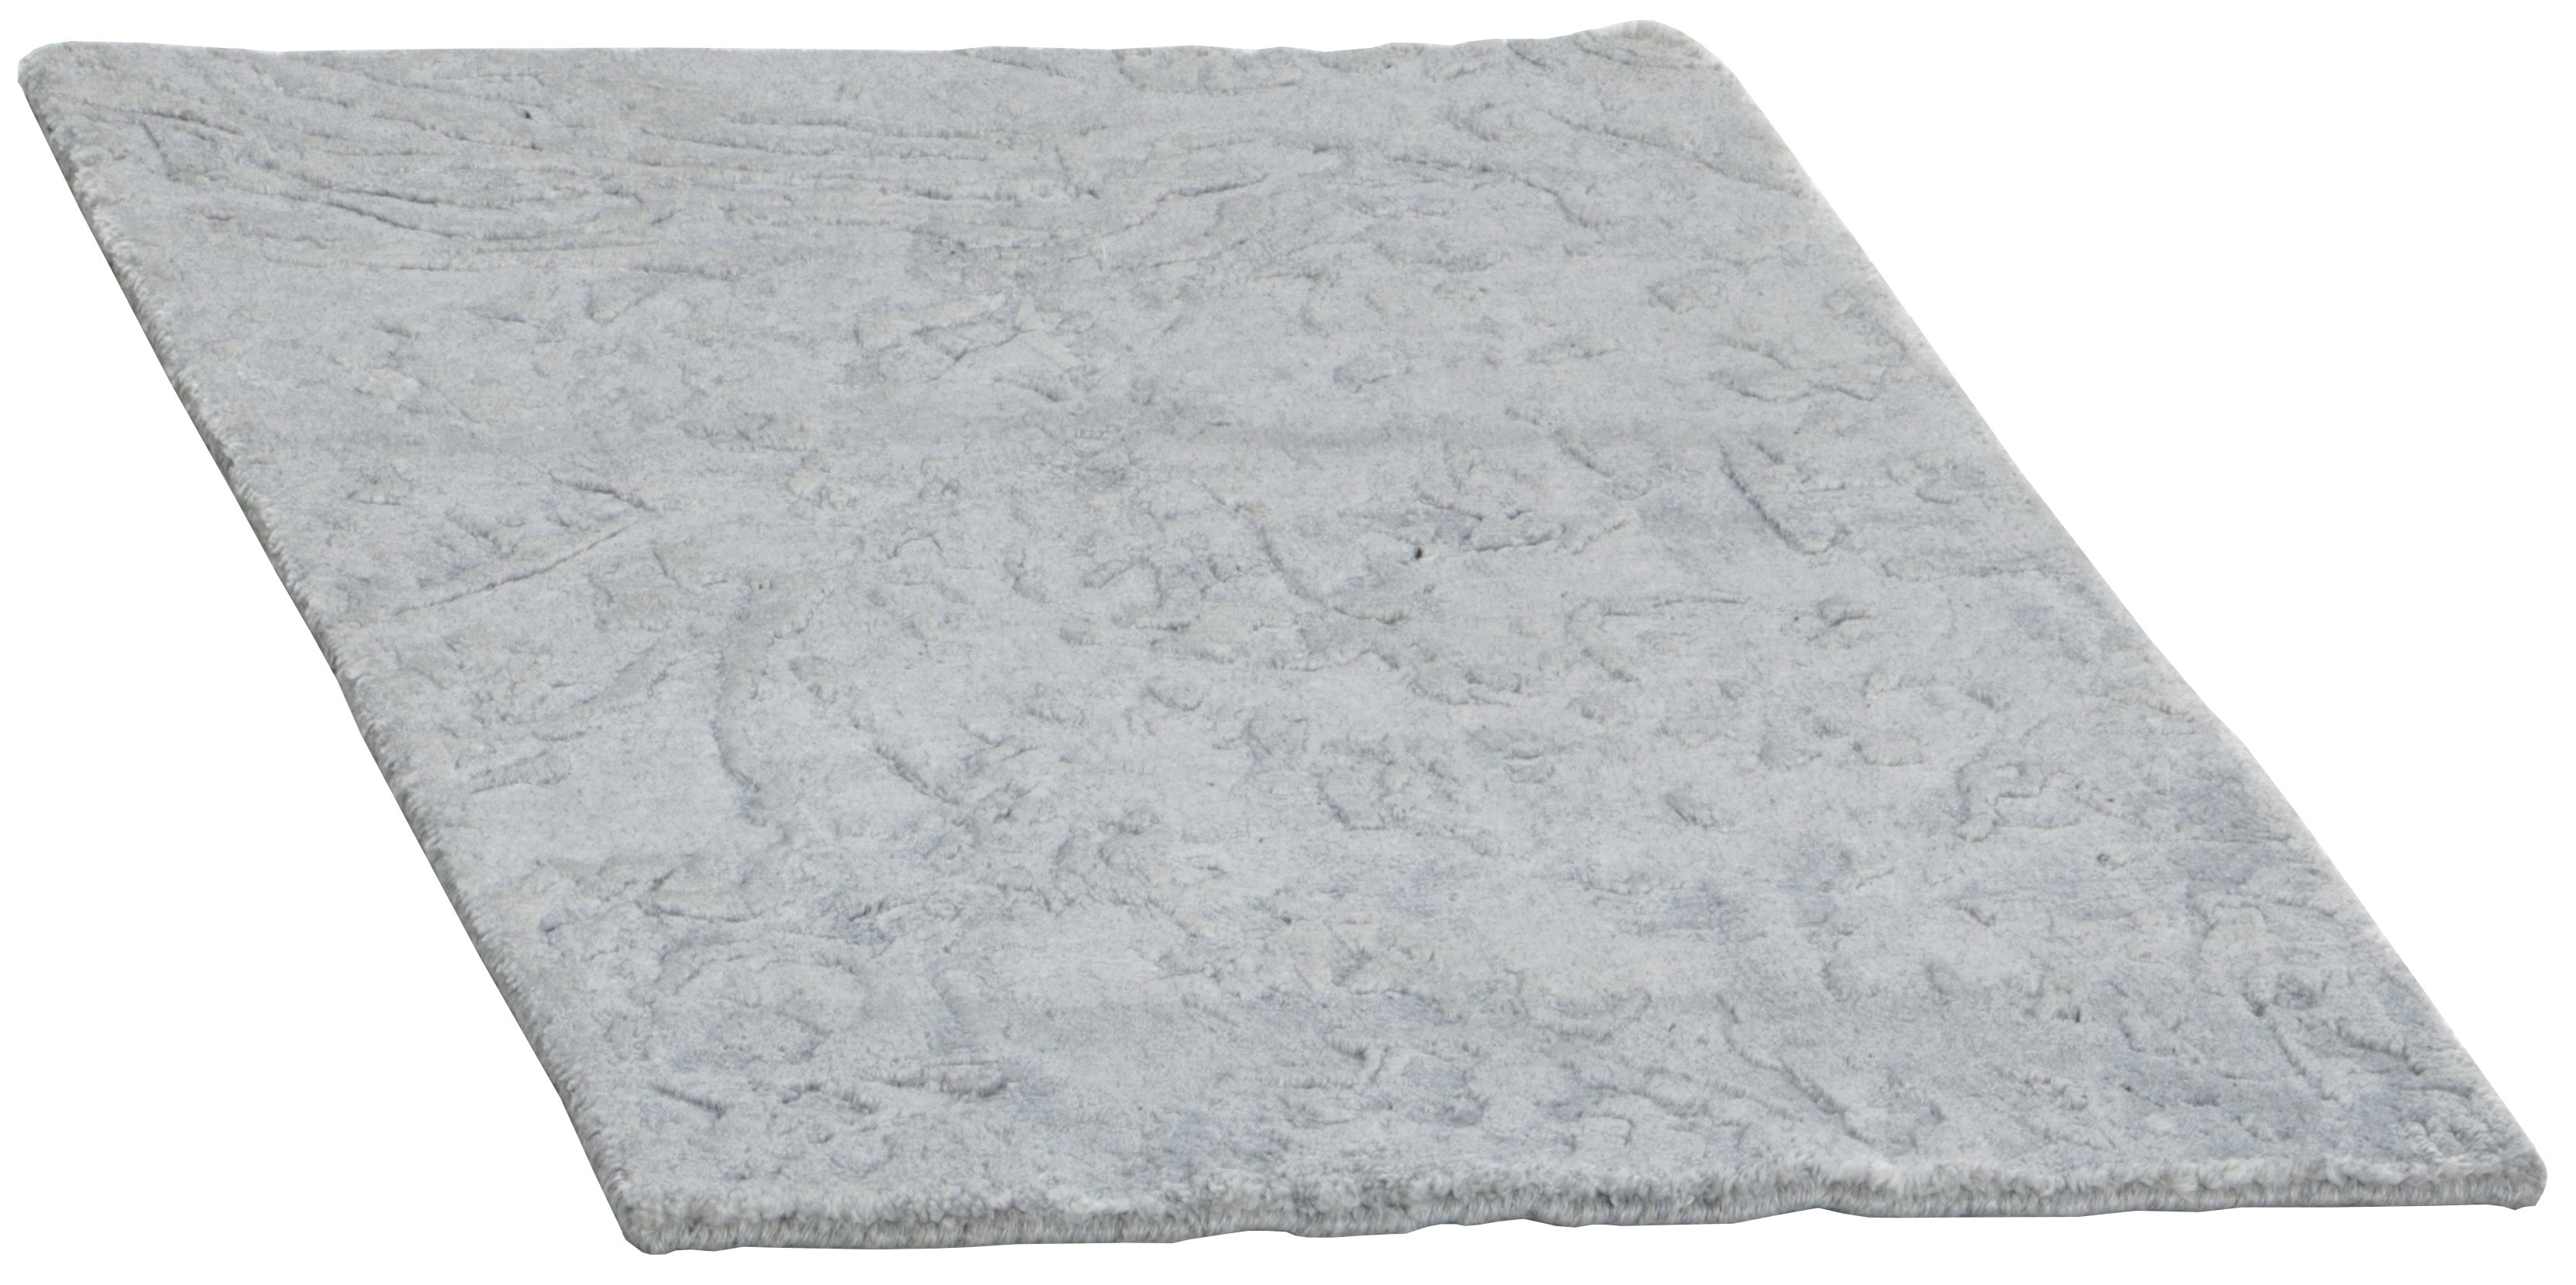 Area rug with abstract design in grey and beige